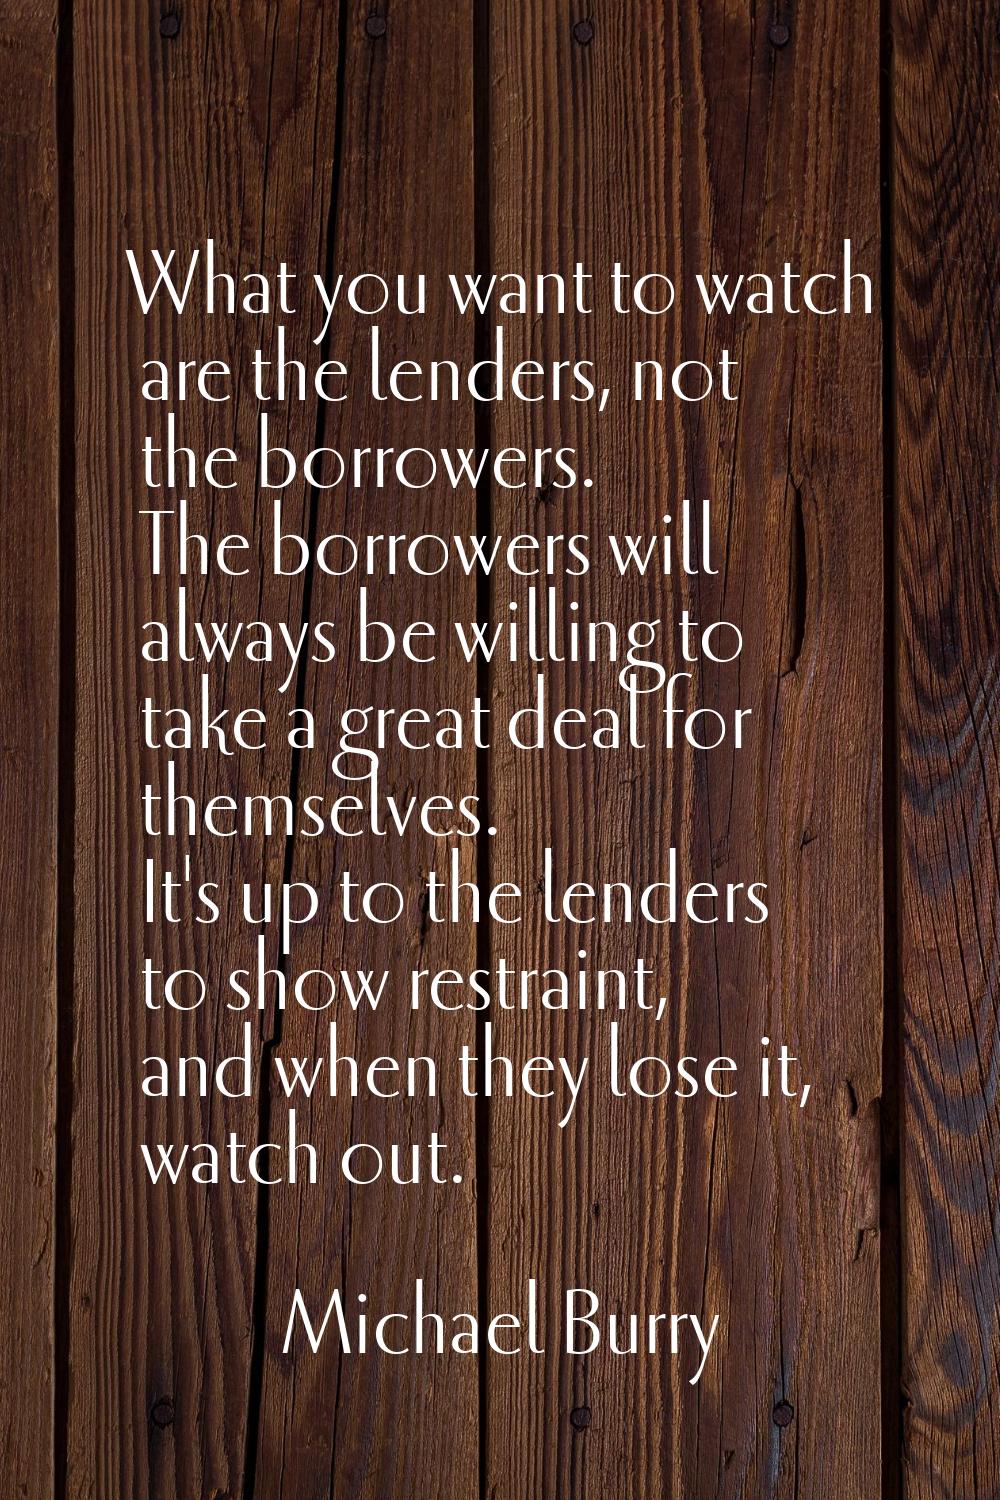 What you want to watch are the lenders, not the borrowers. The borrowers will always be willing to 